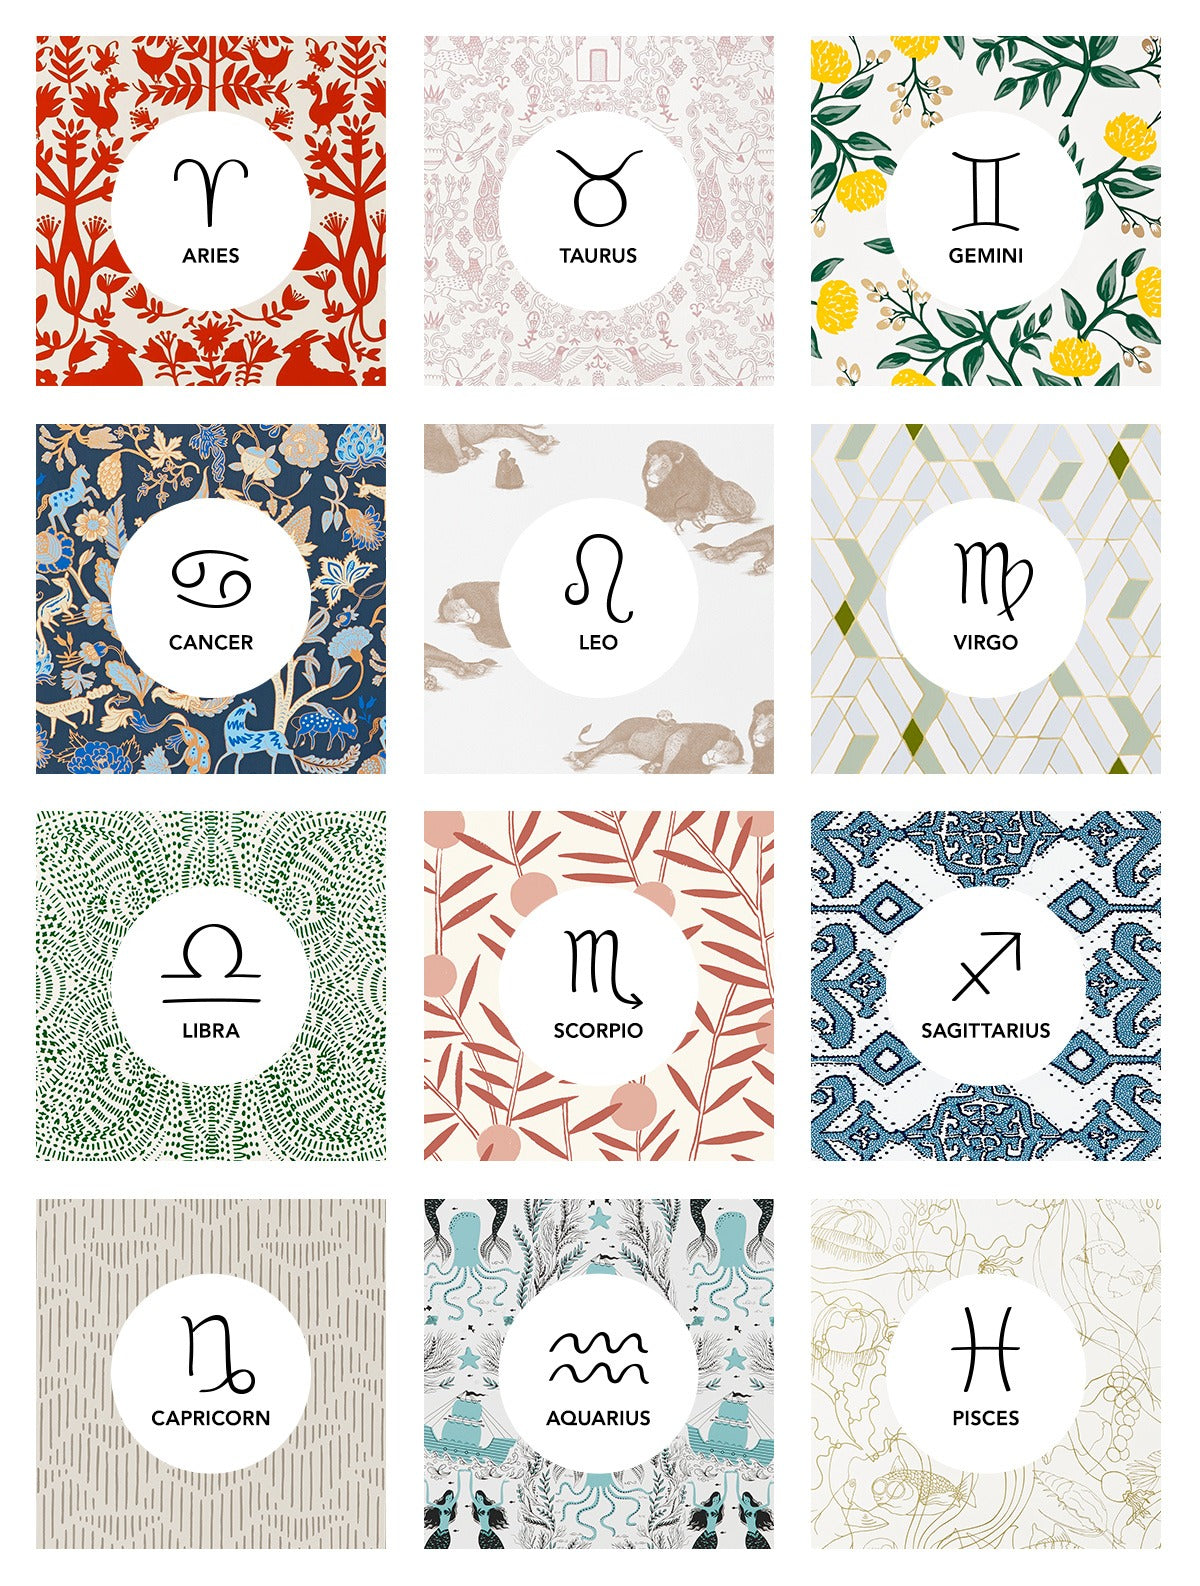 It's Wallpapered in the Stars | Pattern and Zodiac Sign Pairings | Hygge & West